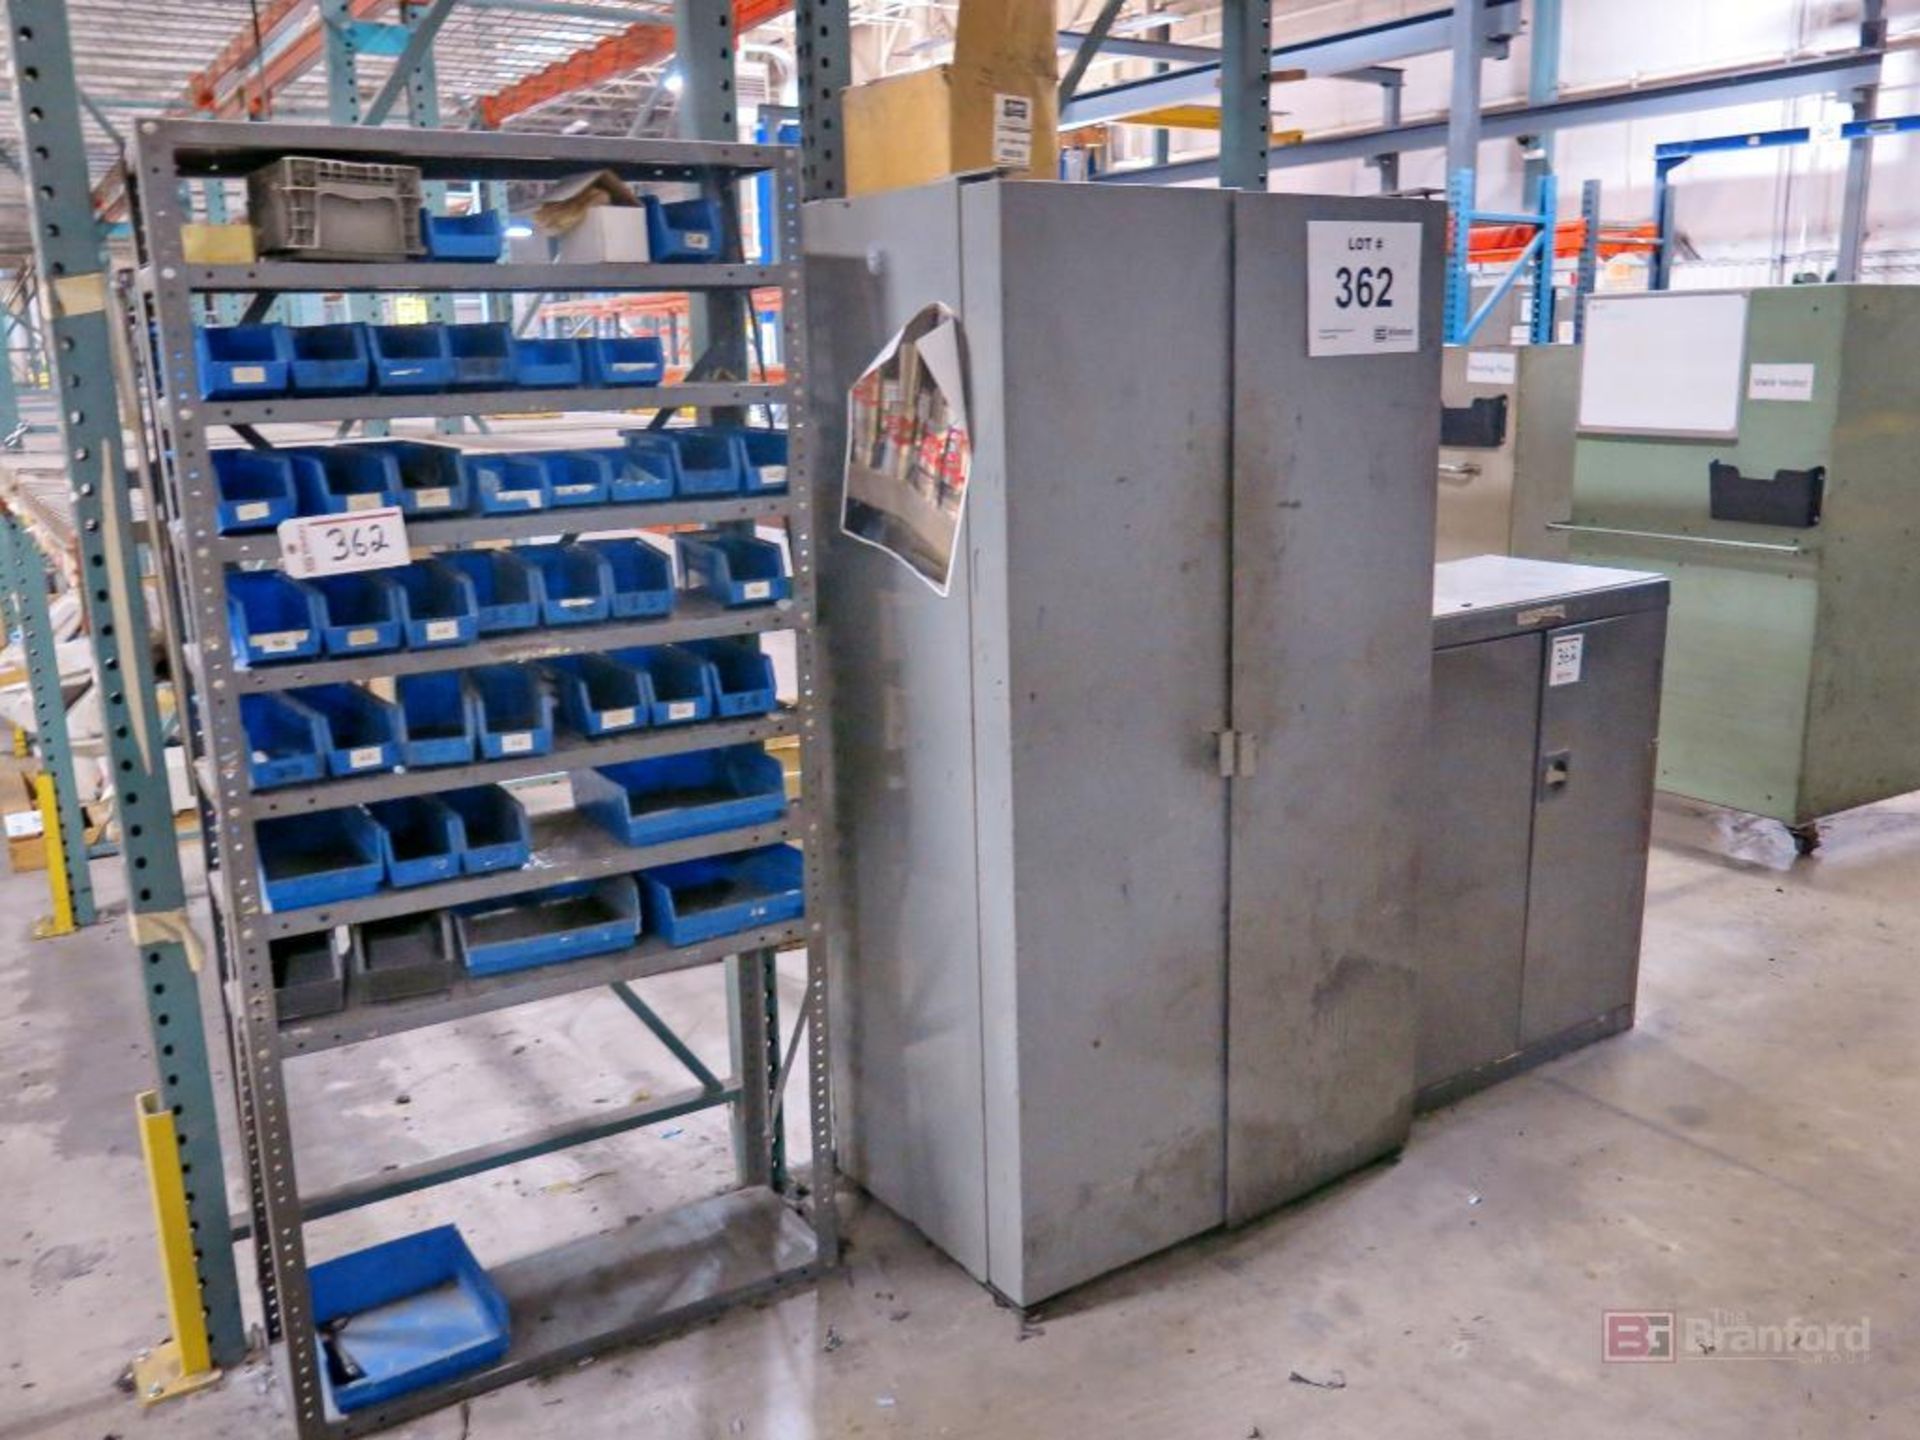 Lot of Heavy Duty Steel Layout Table, Vise, 2-Door Cabinet, Parts Bins and Contents, Shelving Unit